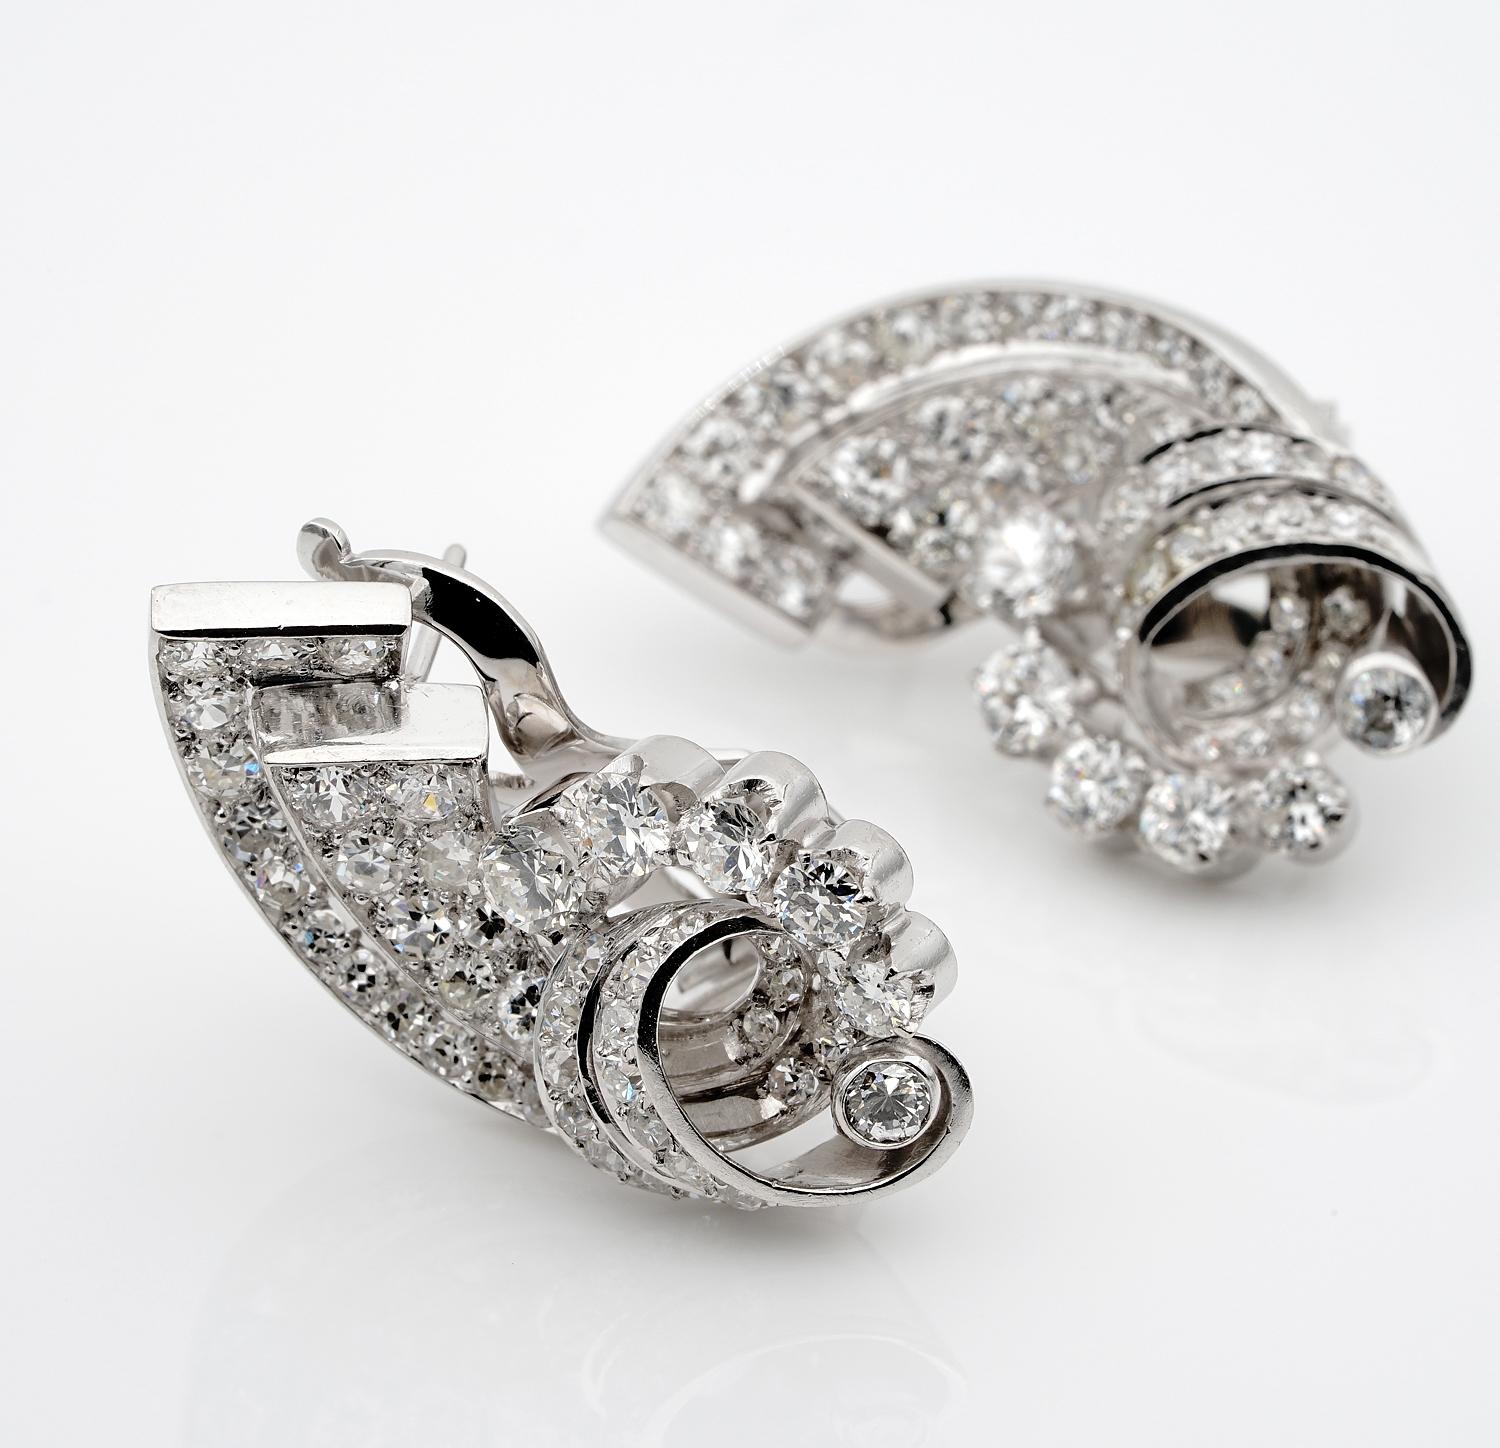 Impressive Deco!
Cornucopias together with fabulous bows were a MUST during the Deco era, brooches earrings were to impress loaded with Diamonds and sometimes with coloured gemstones complement
These truly terrific pair of the Deco era are clip on